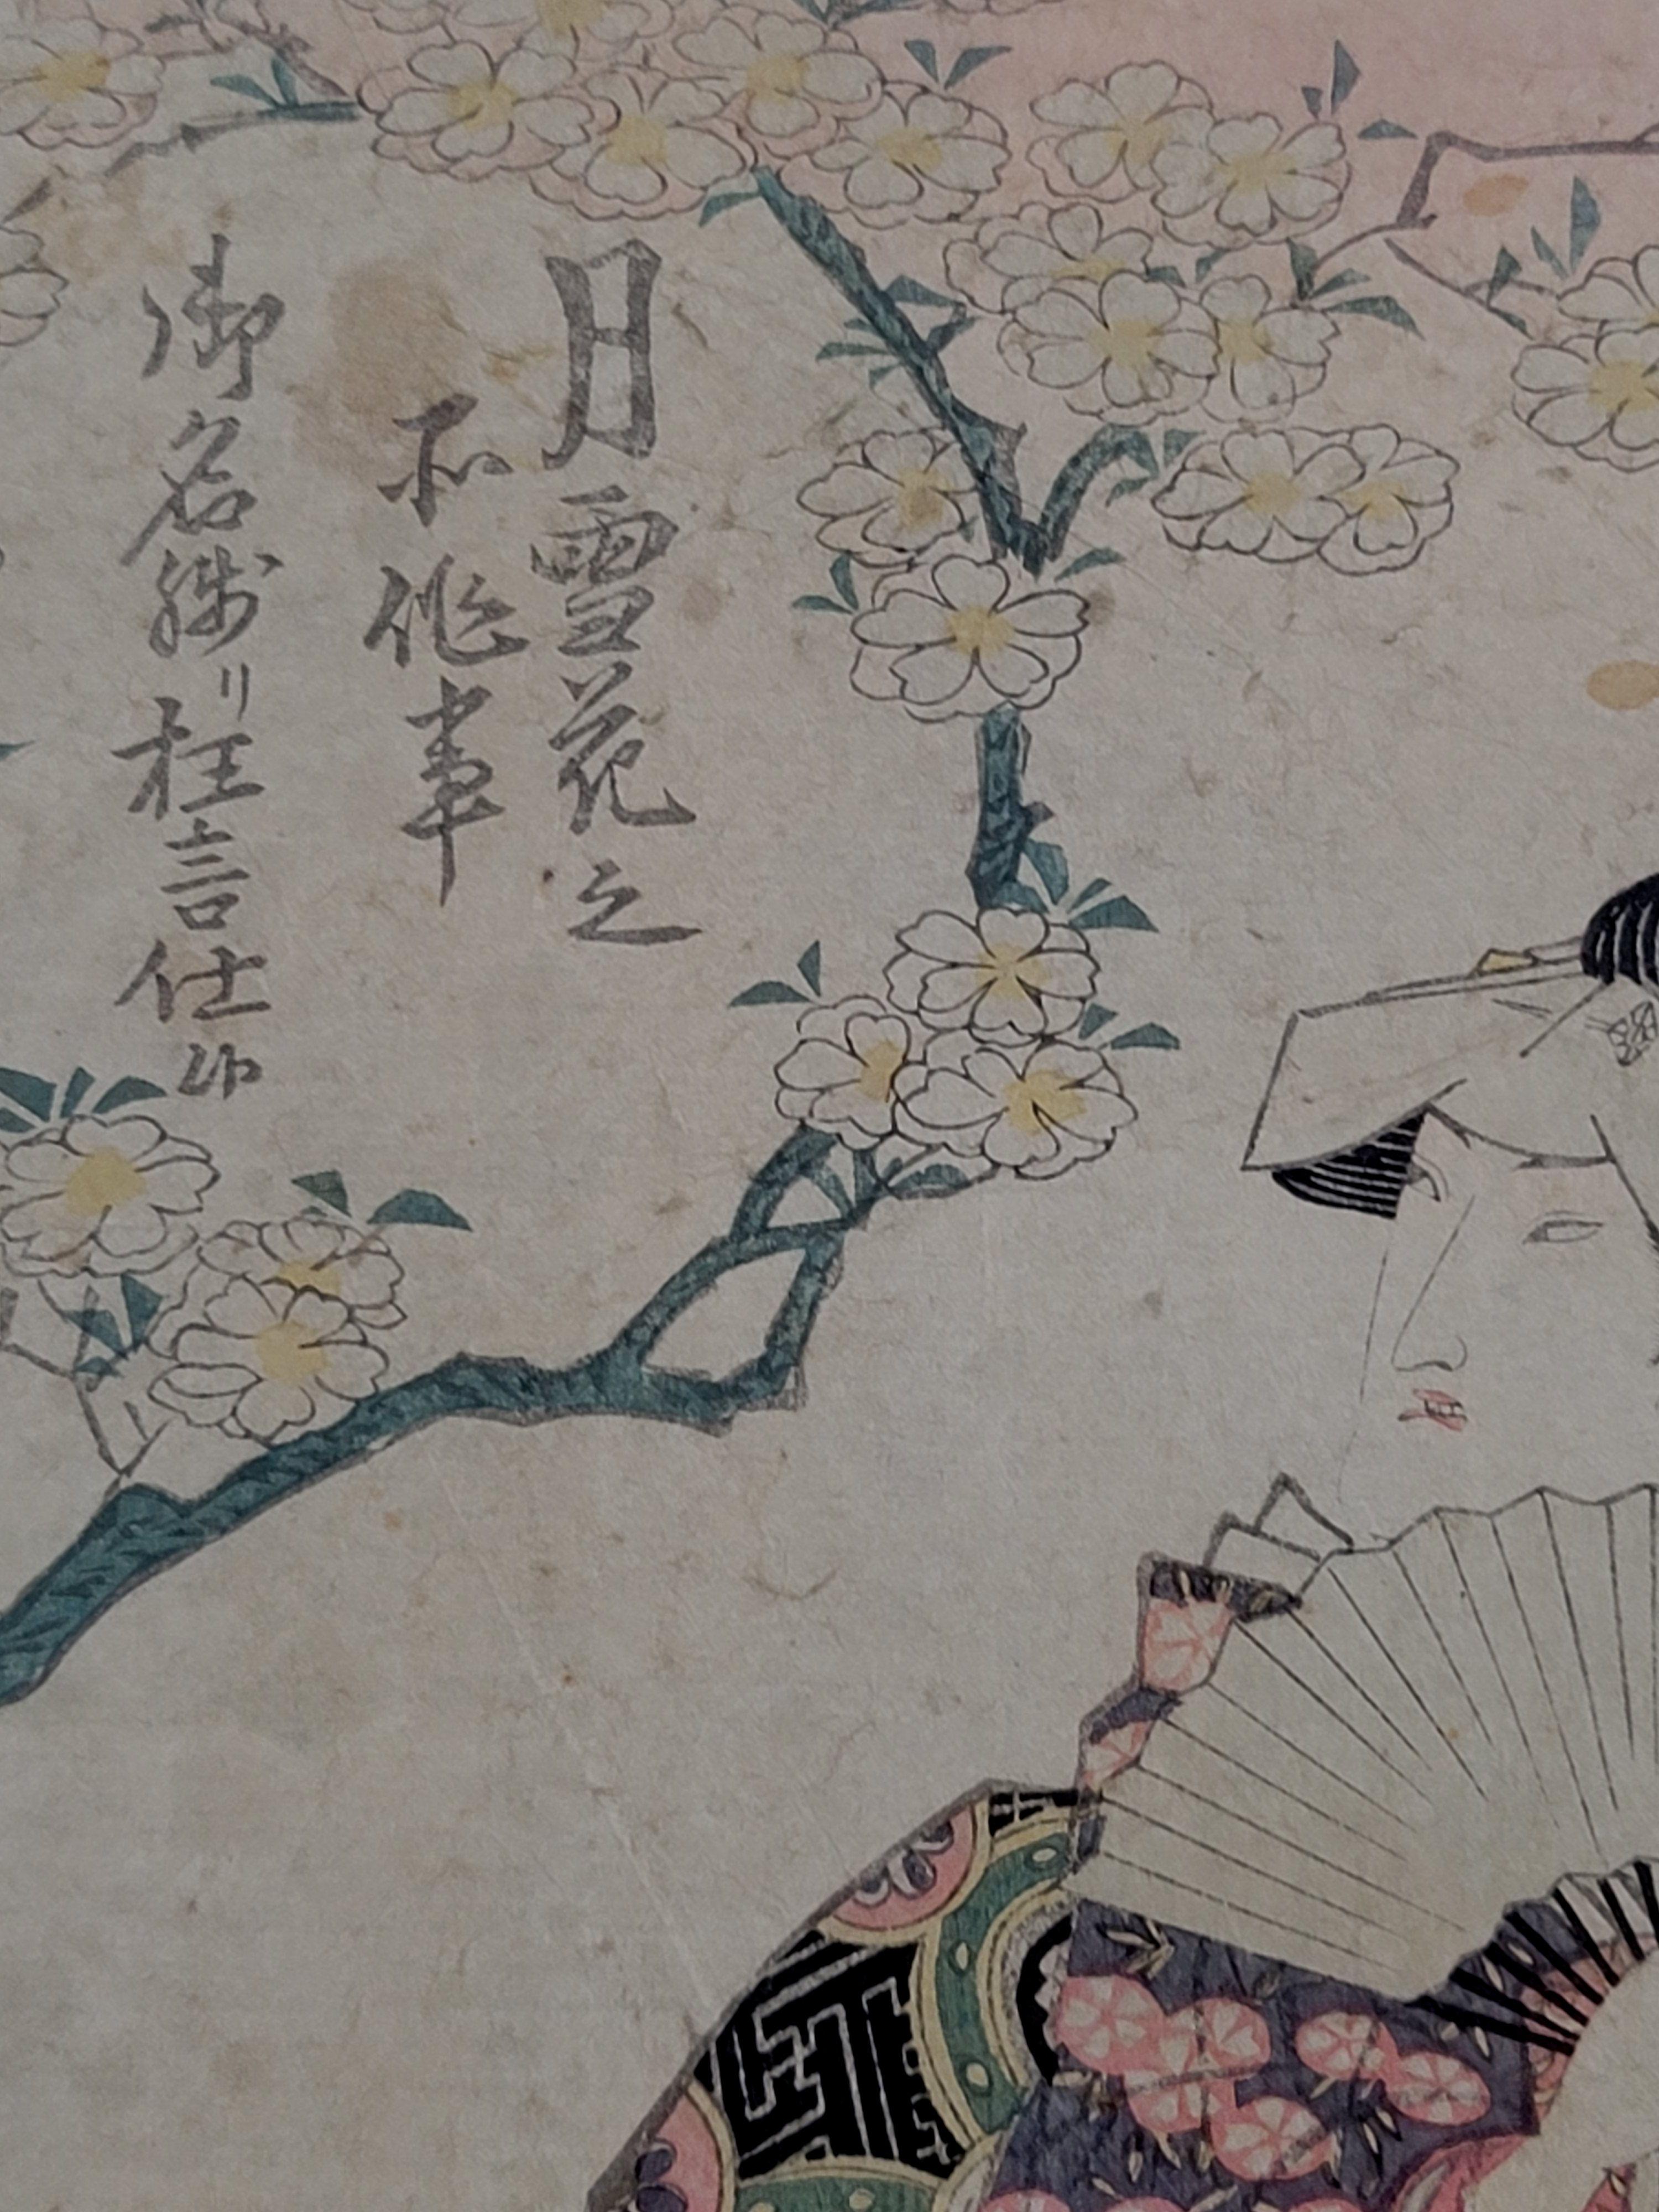 Japanese Woodblock Print by Utagawa Toyokuni I In Good Condition For Sale In Norton, MA